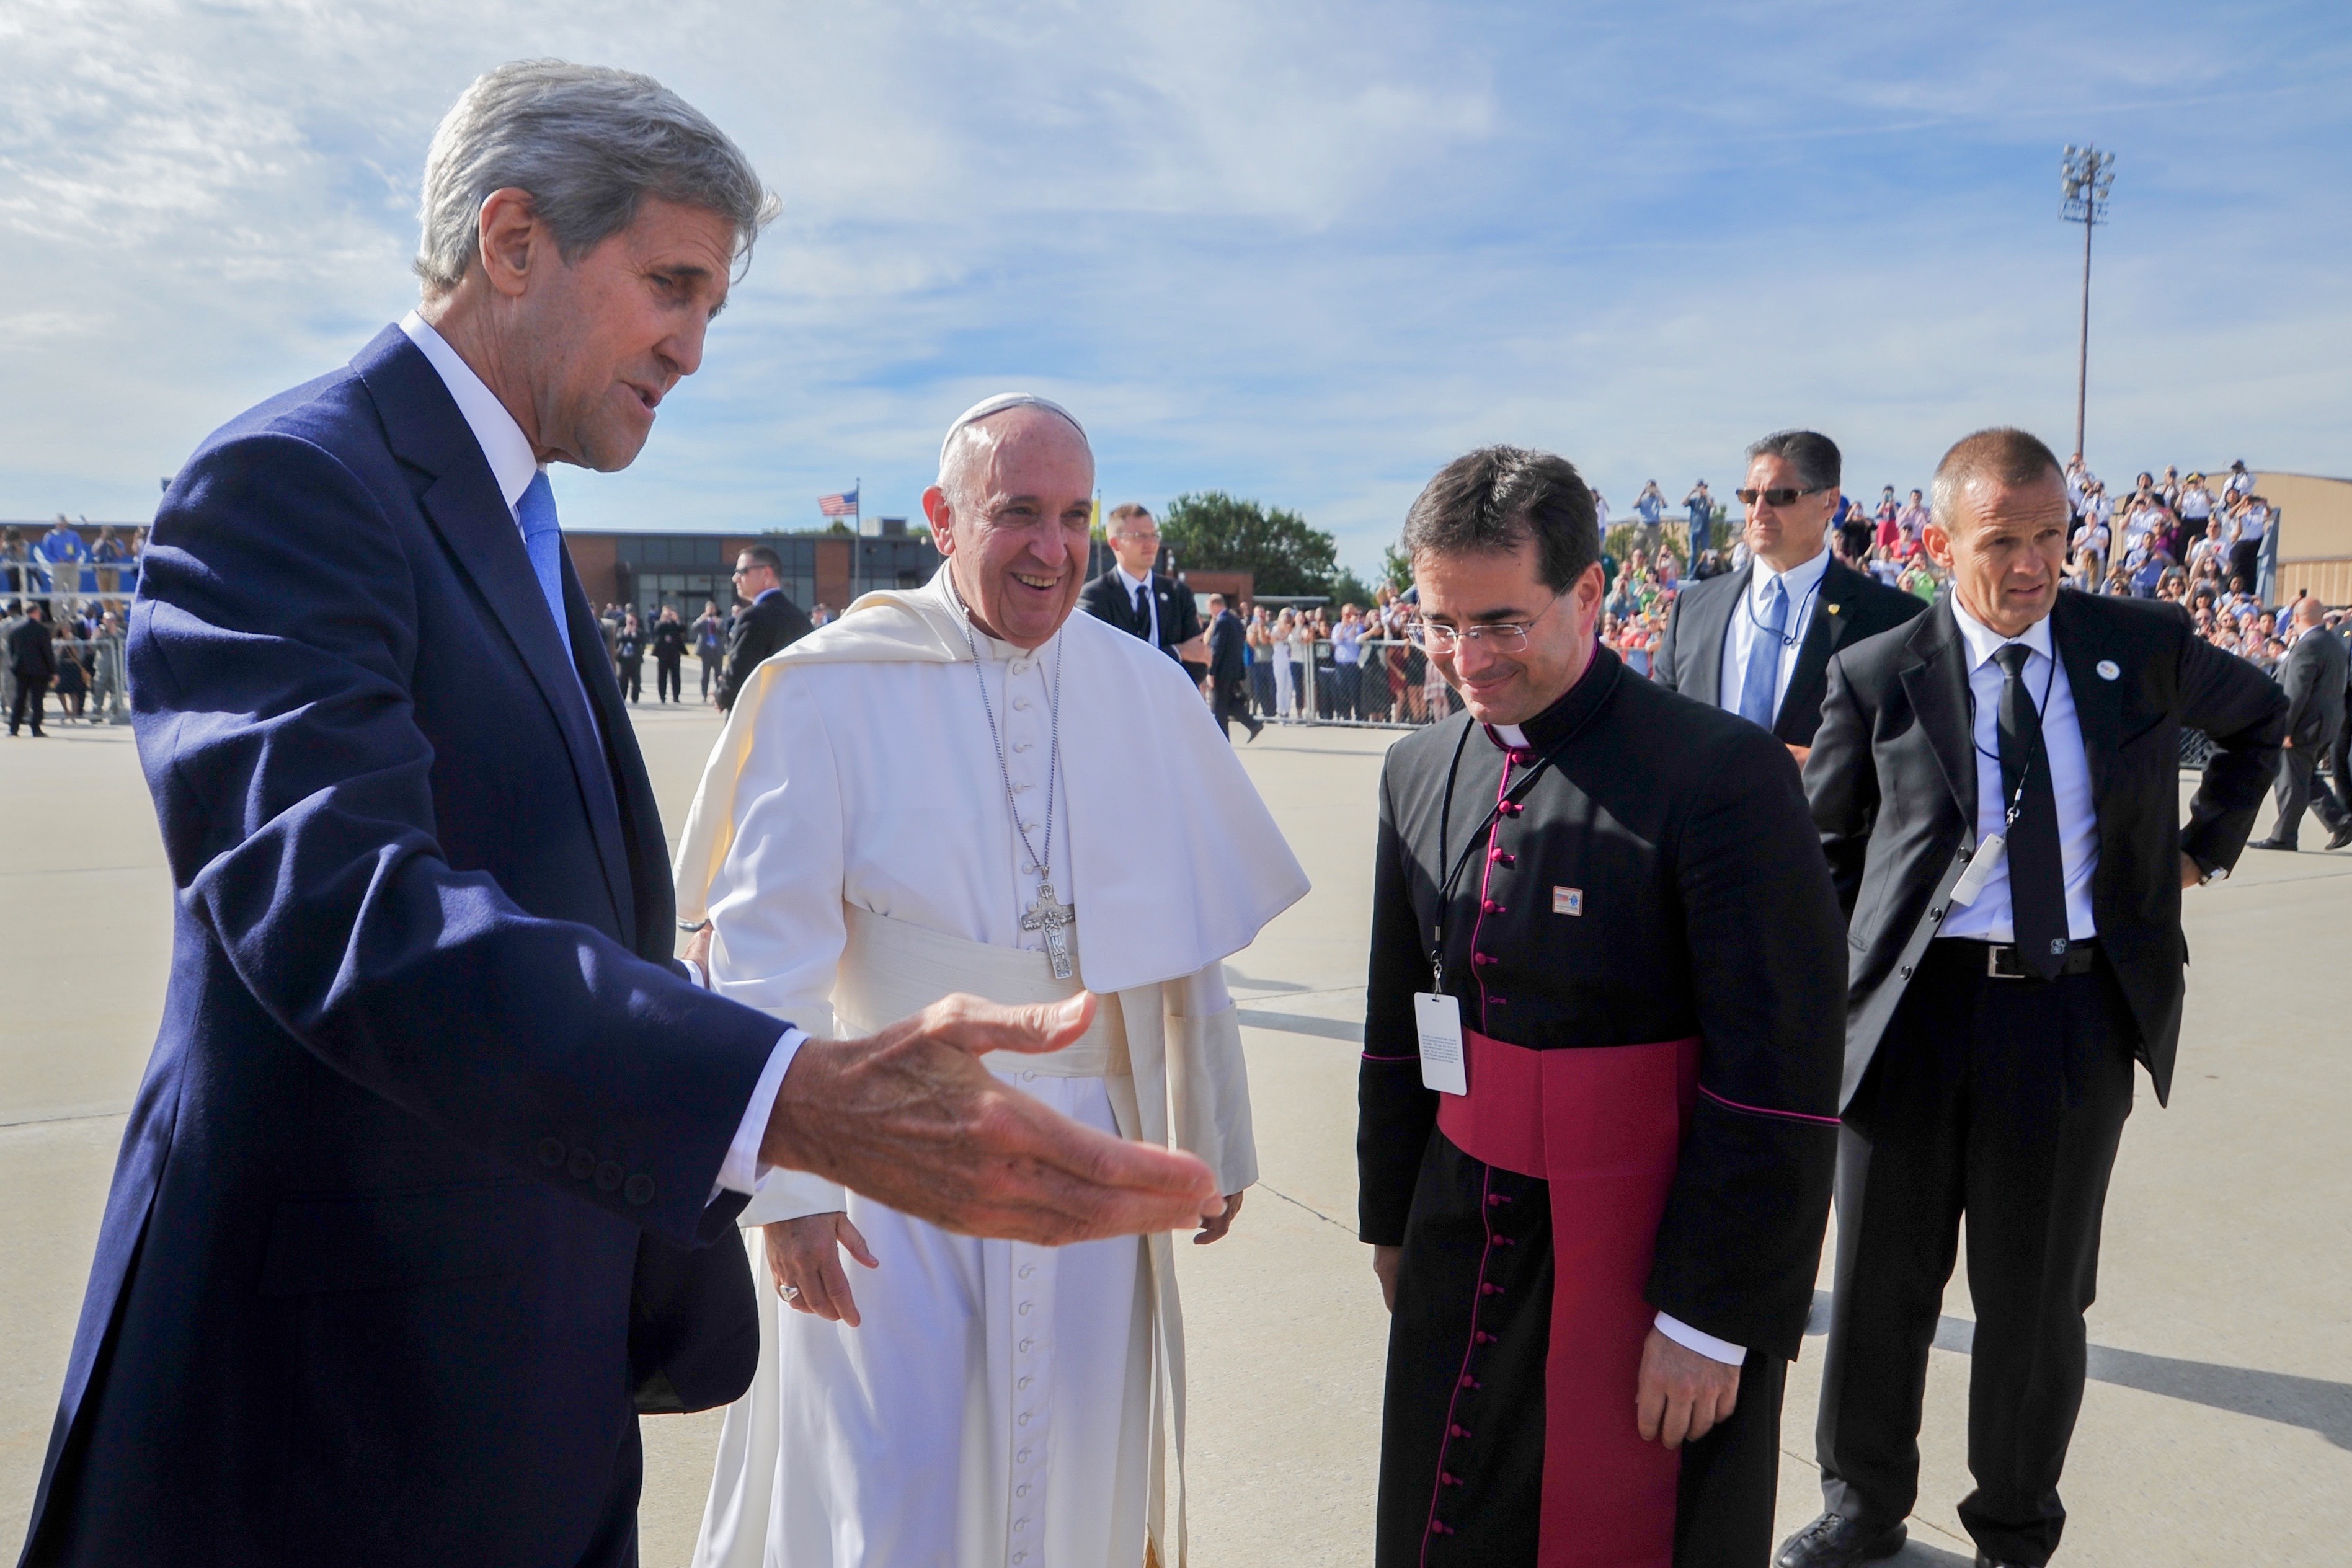 Secretary Kerry Guides Pope Francis Towards a Receiving Line at Andrews Air Force Base